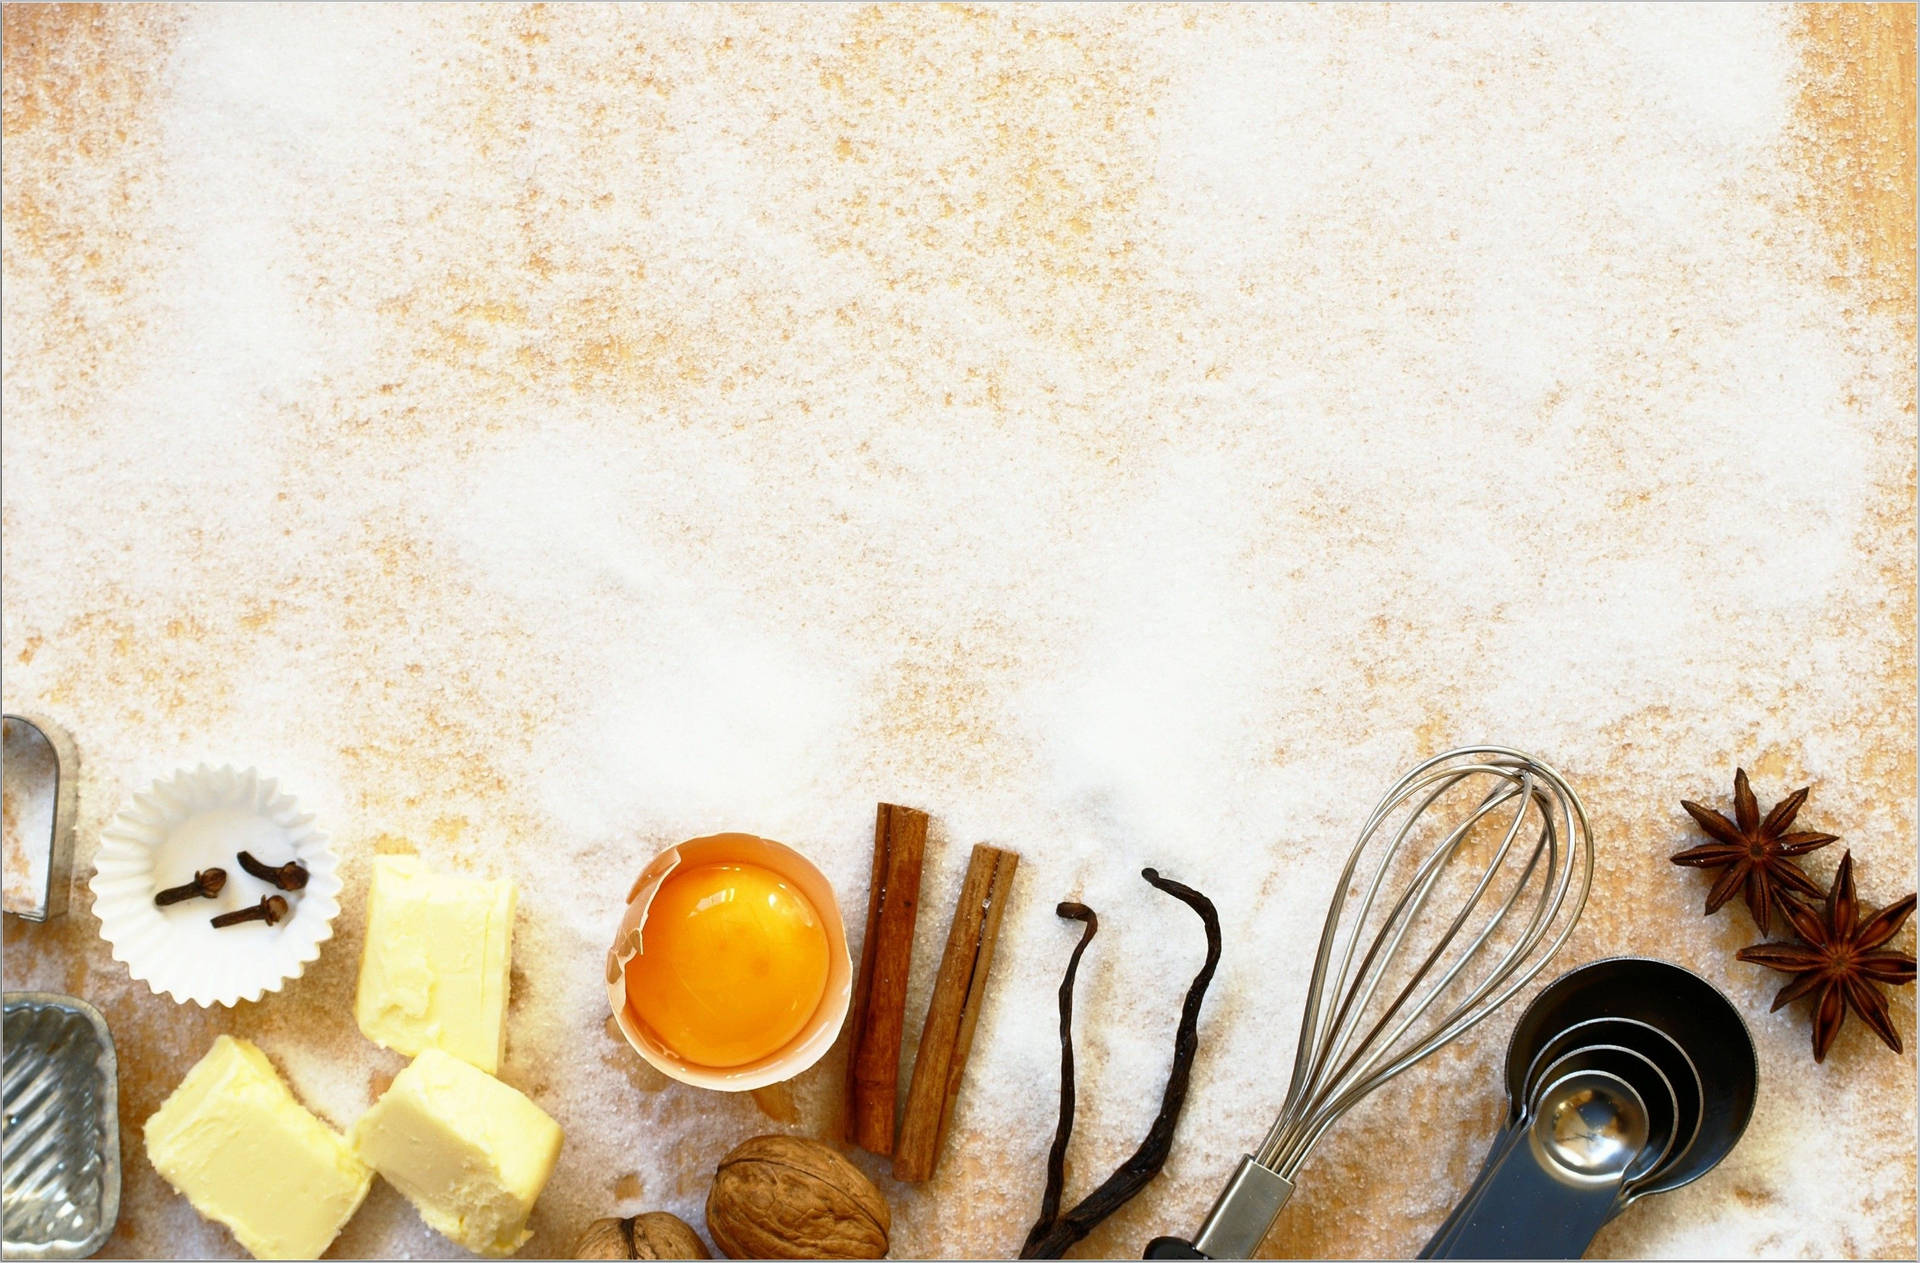 Food Baking Materials Background